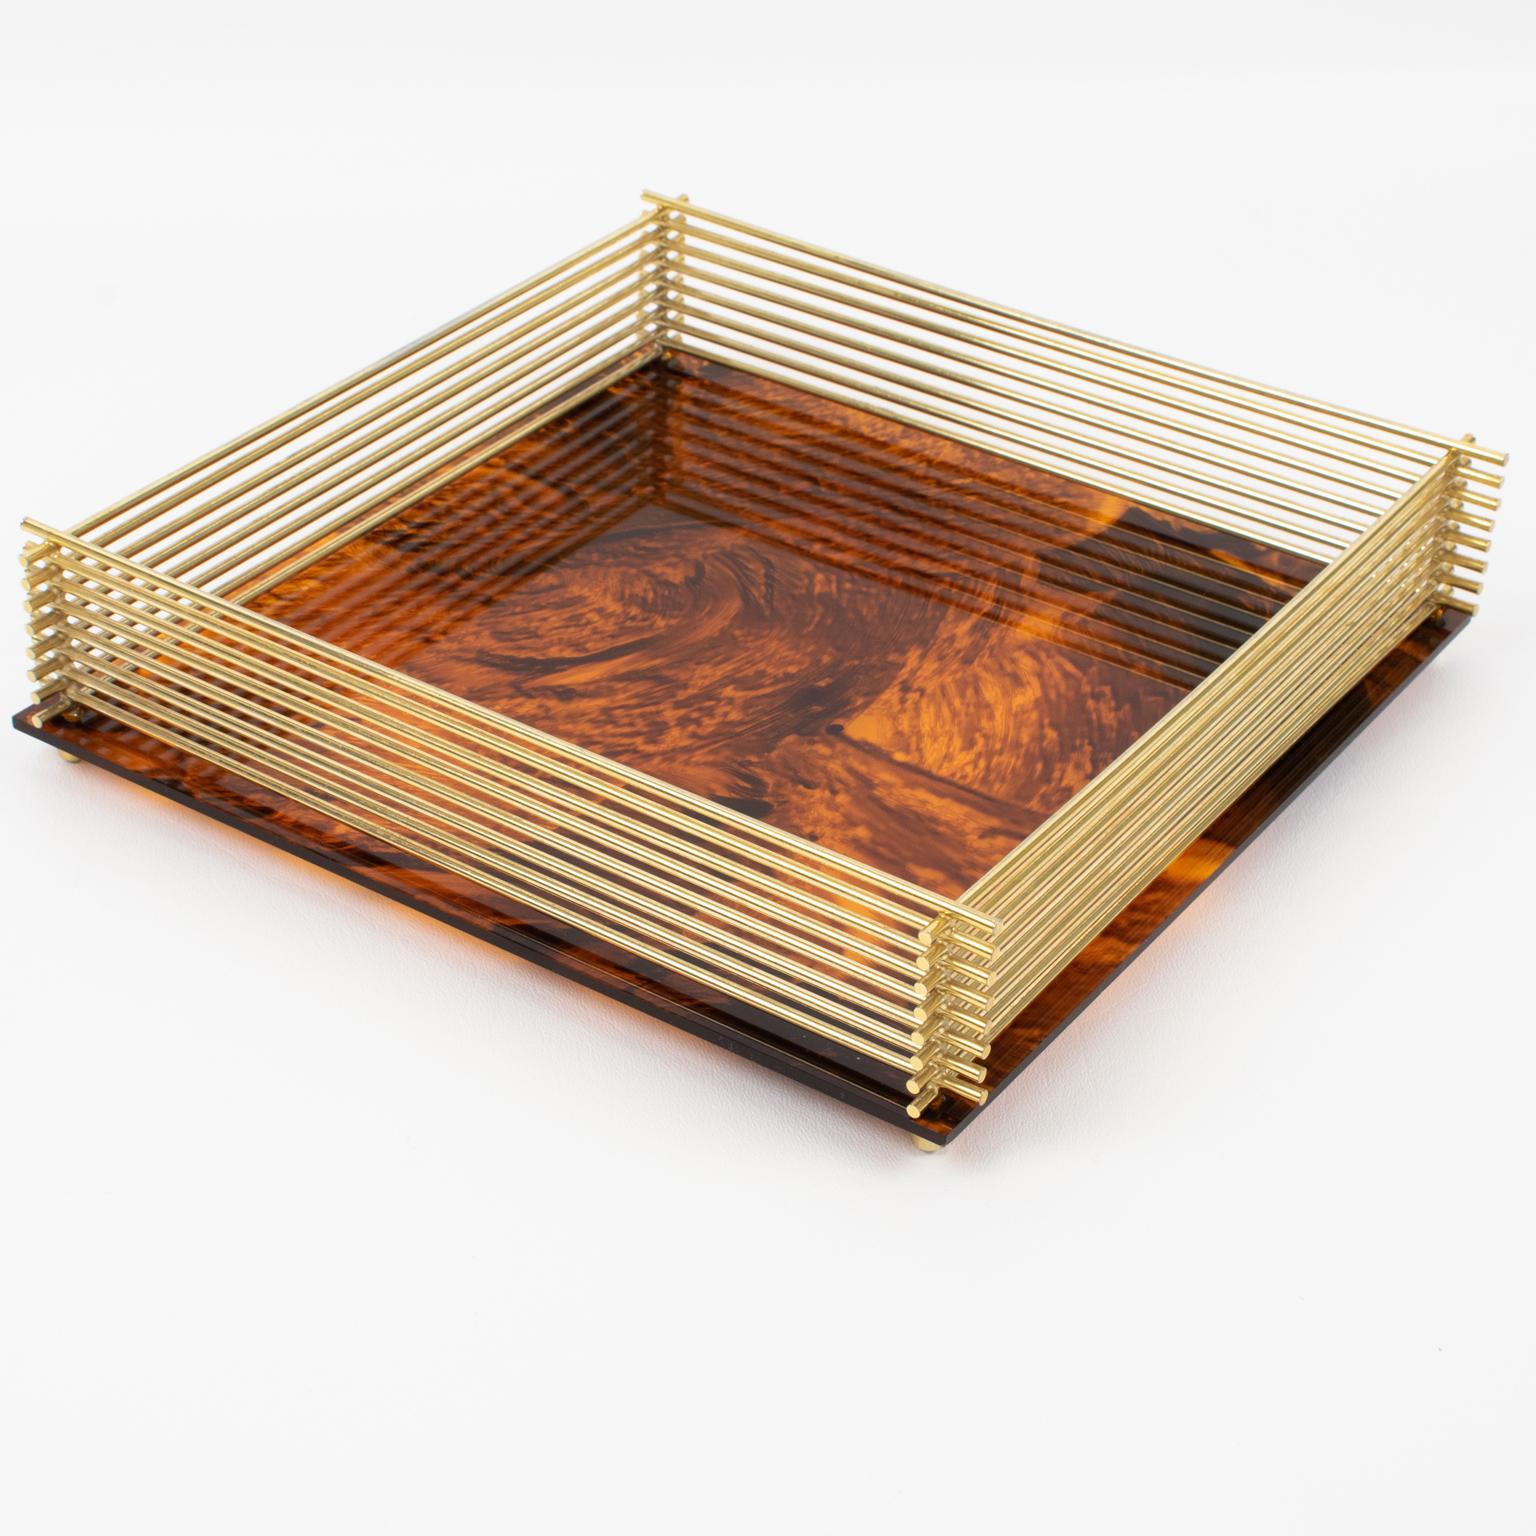 This is a lovely barware serving tray crafted in Italy in the 1970s. The platter or decorative bowl boasts a square shape with a gilded brass raised gallery and a Lucite base with a tortoiseshell (tortoise) textured pattern. This tray is versatile